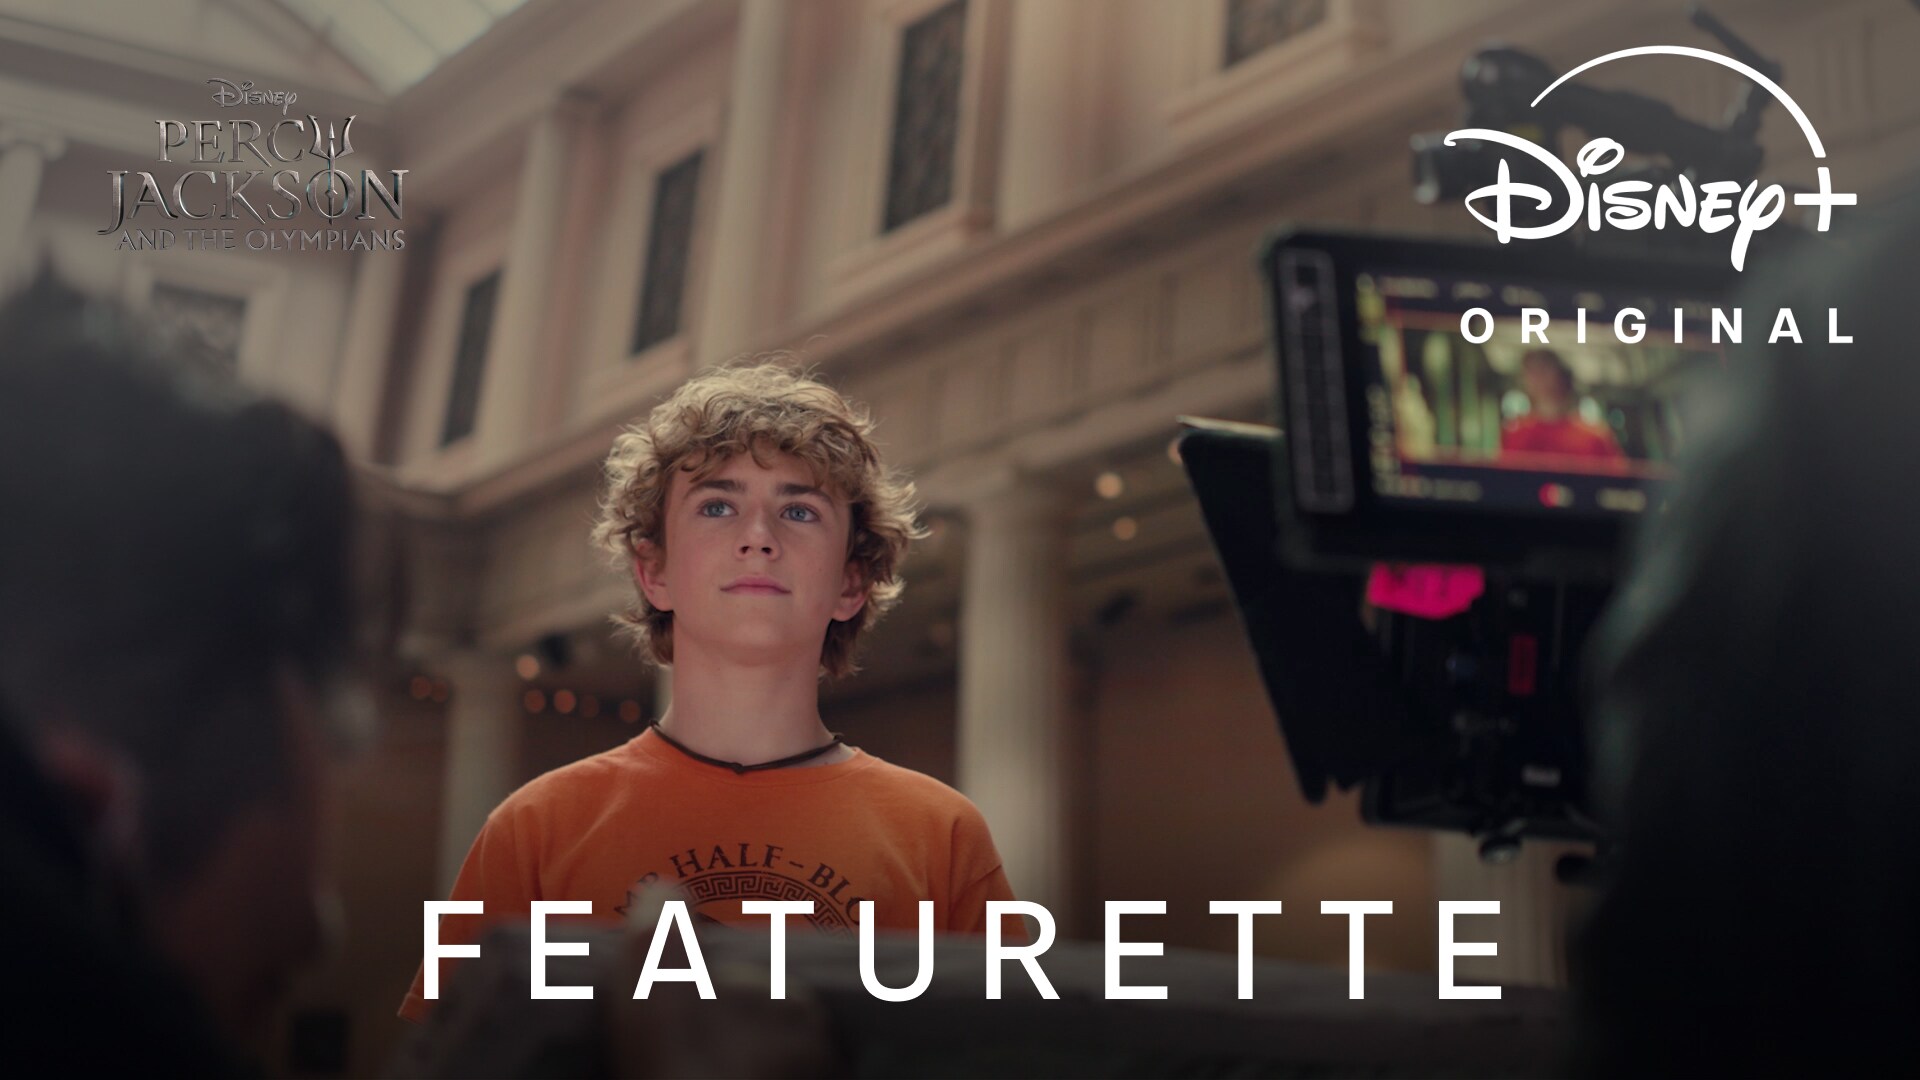 Finding Percy Jackson Featurette | Percy Jackson and the Olympians | Disney+